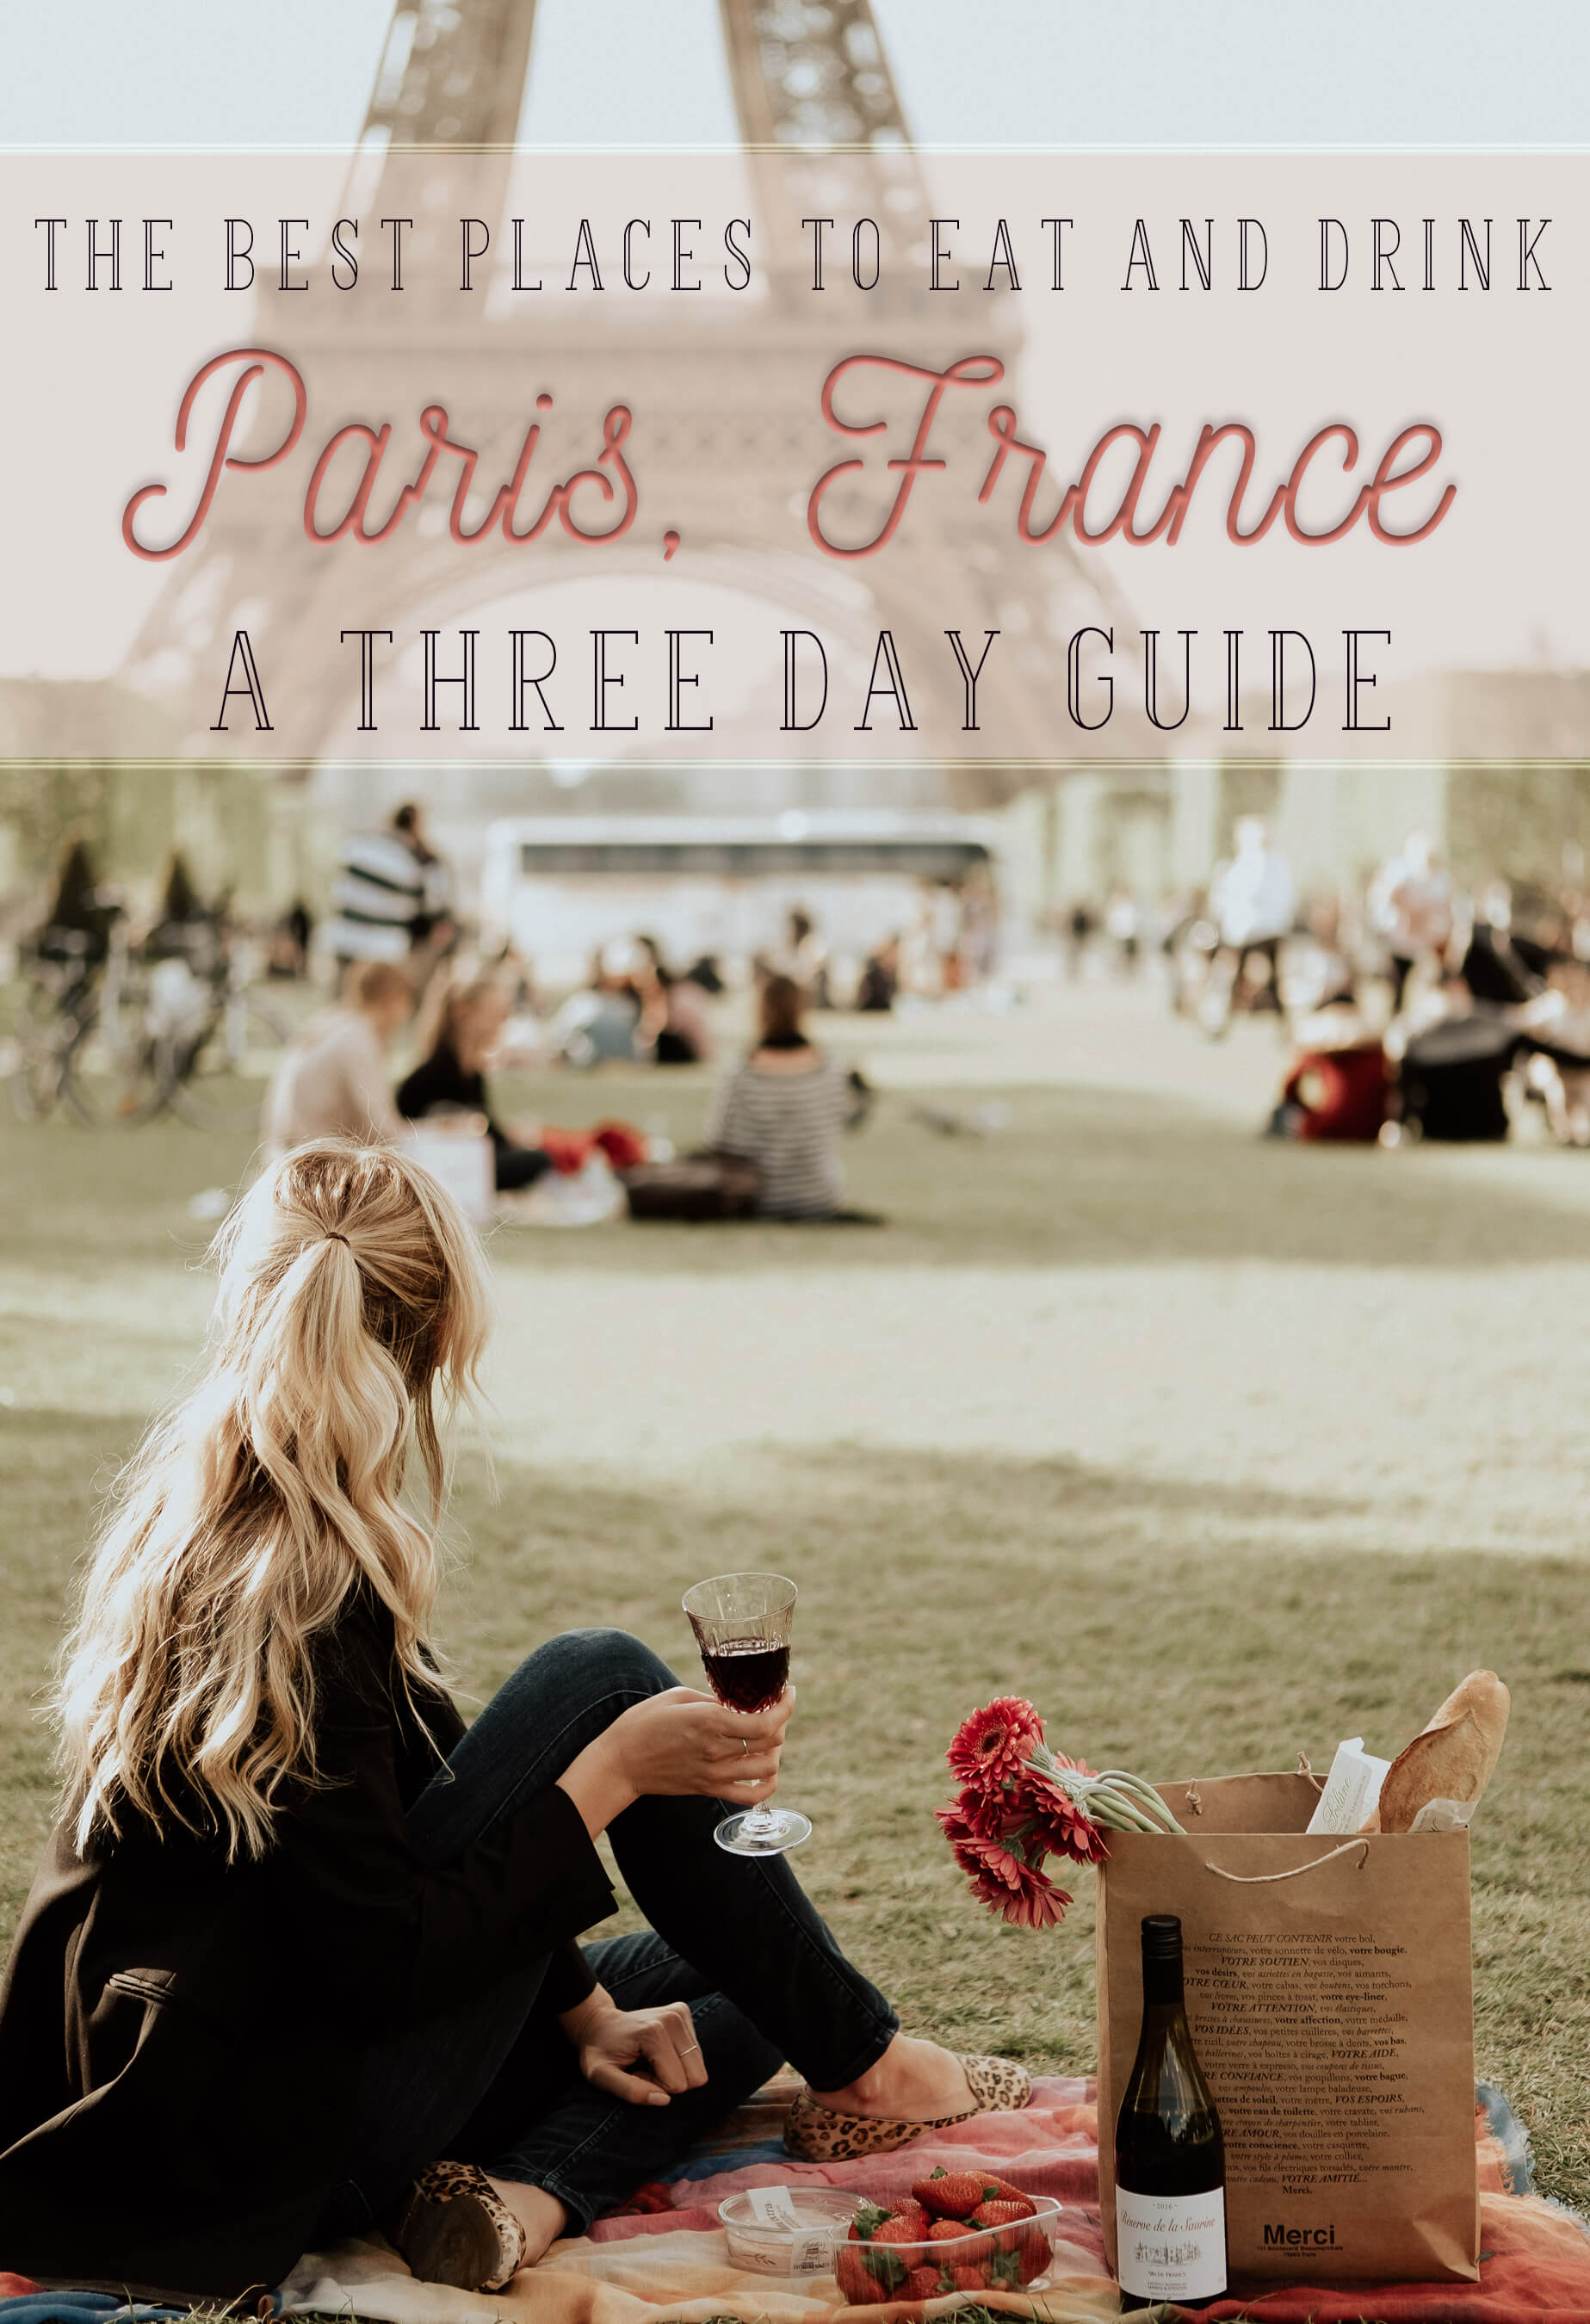 Where to eat and drink in Paris France